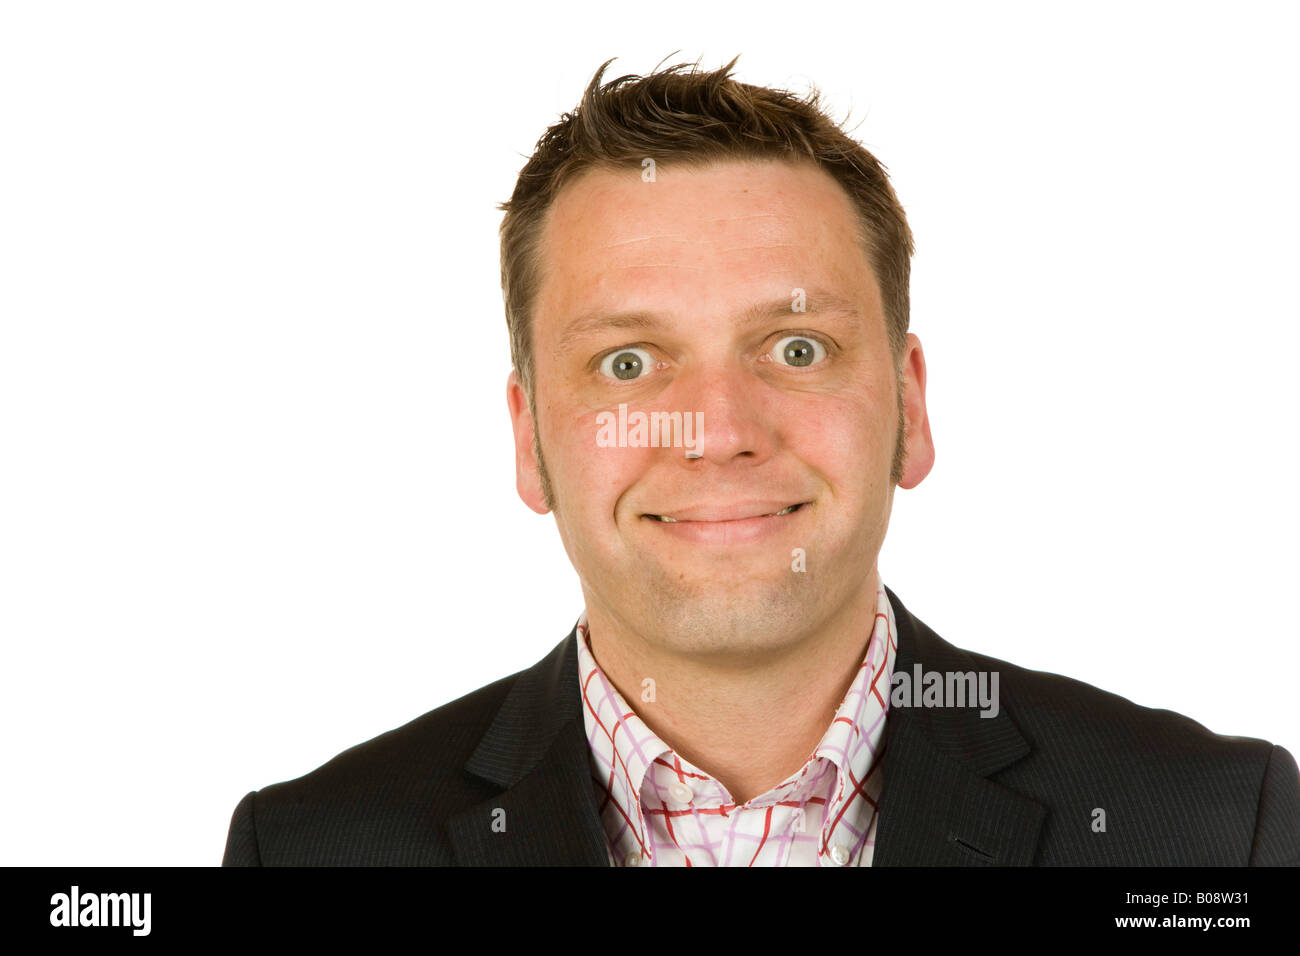 40 year-old businessman making a goofy face Stock Photo